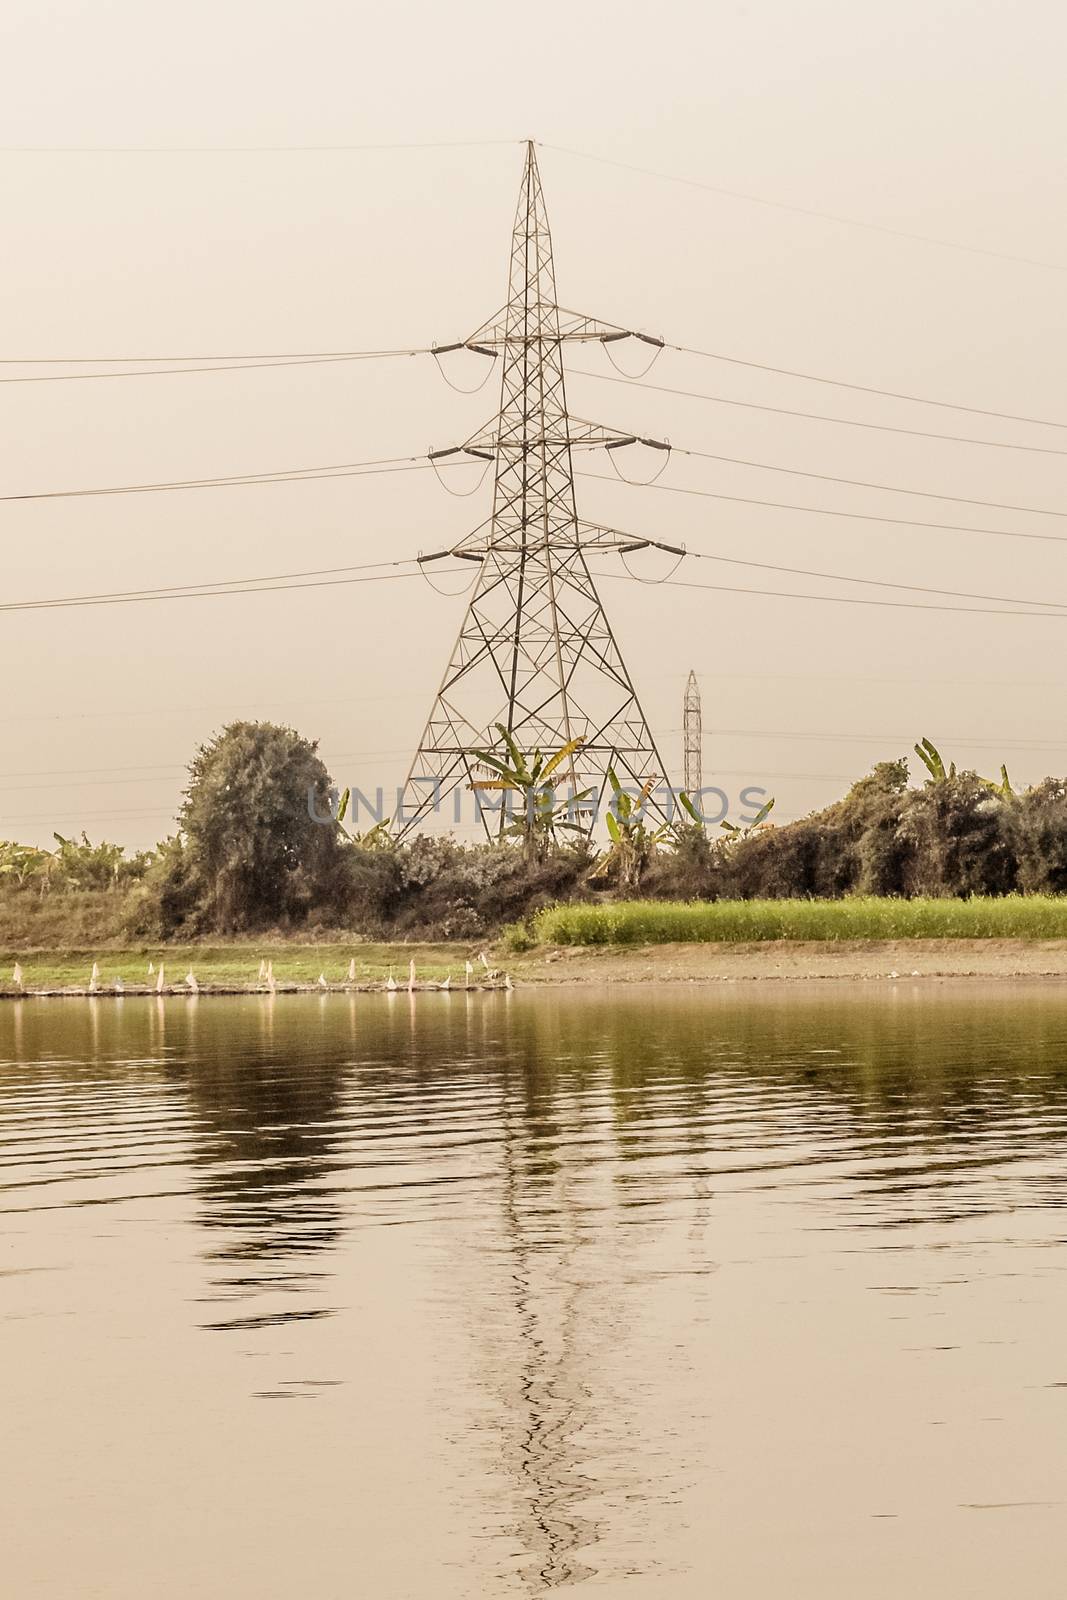 A transmission tower or power tower (electricity pylon or electric pylon in the United Kingdom, Canada and parts of Europe) tall structure, a steel lattice tower, used to support overhead power line. by sudiptabhowmick